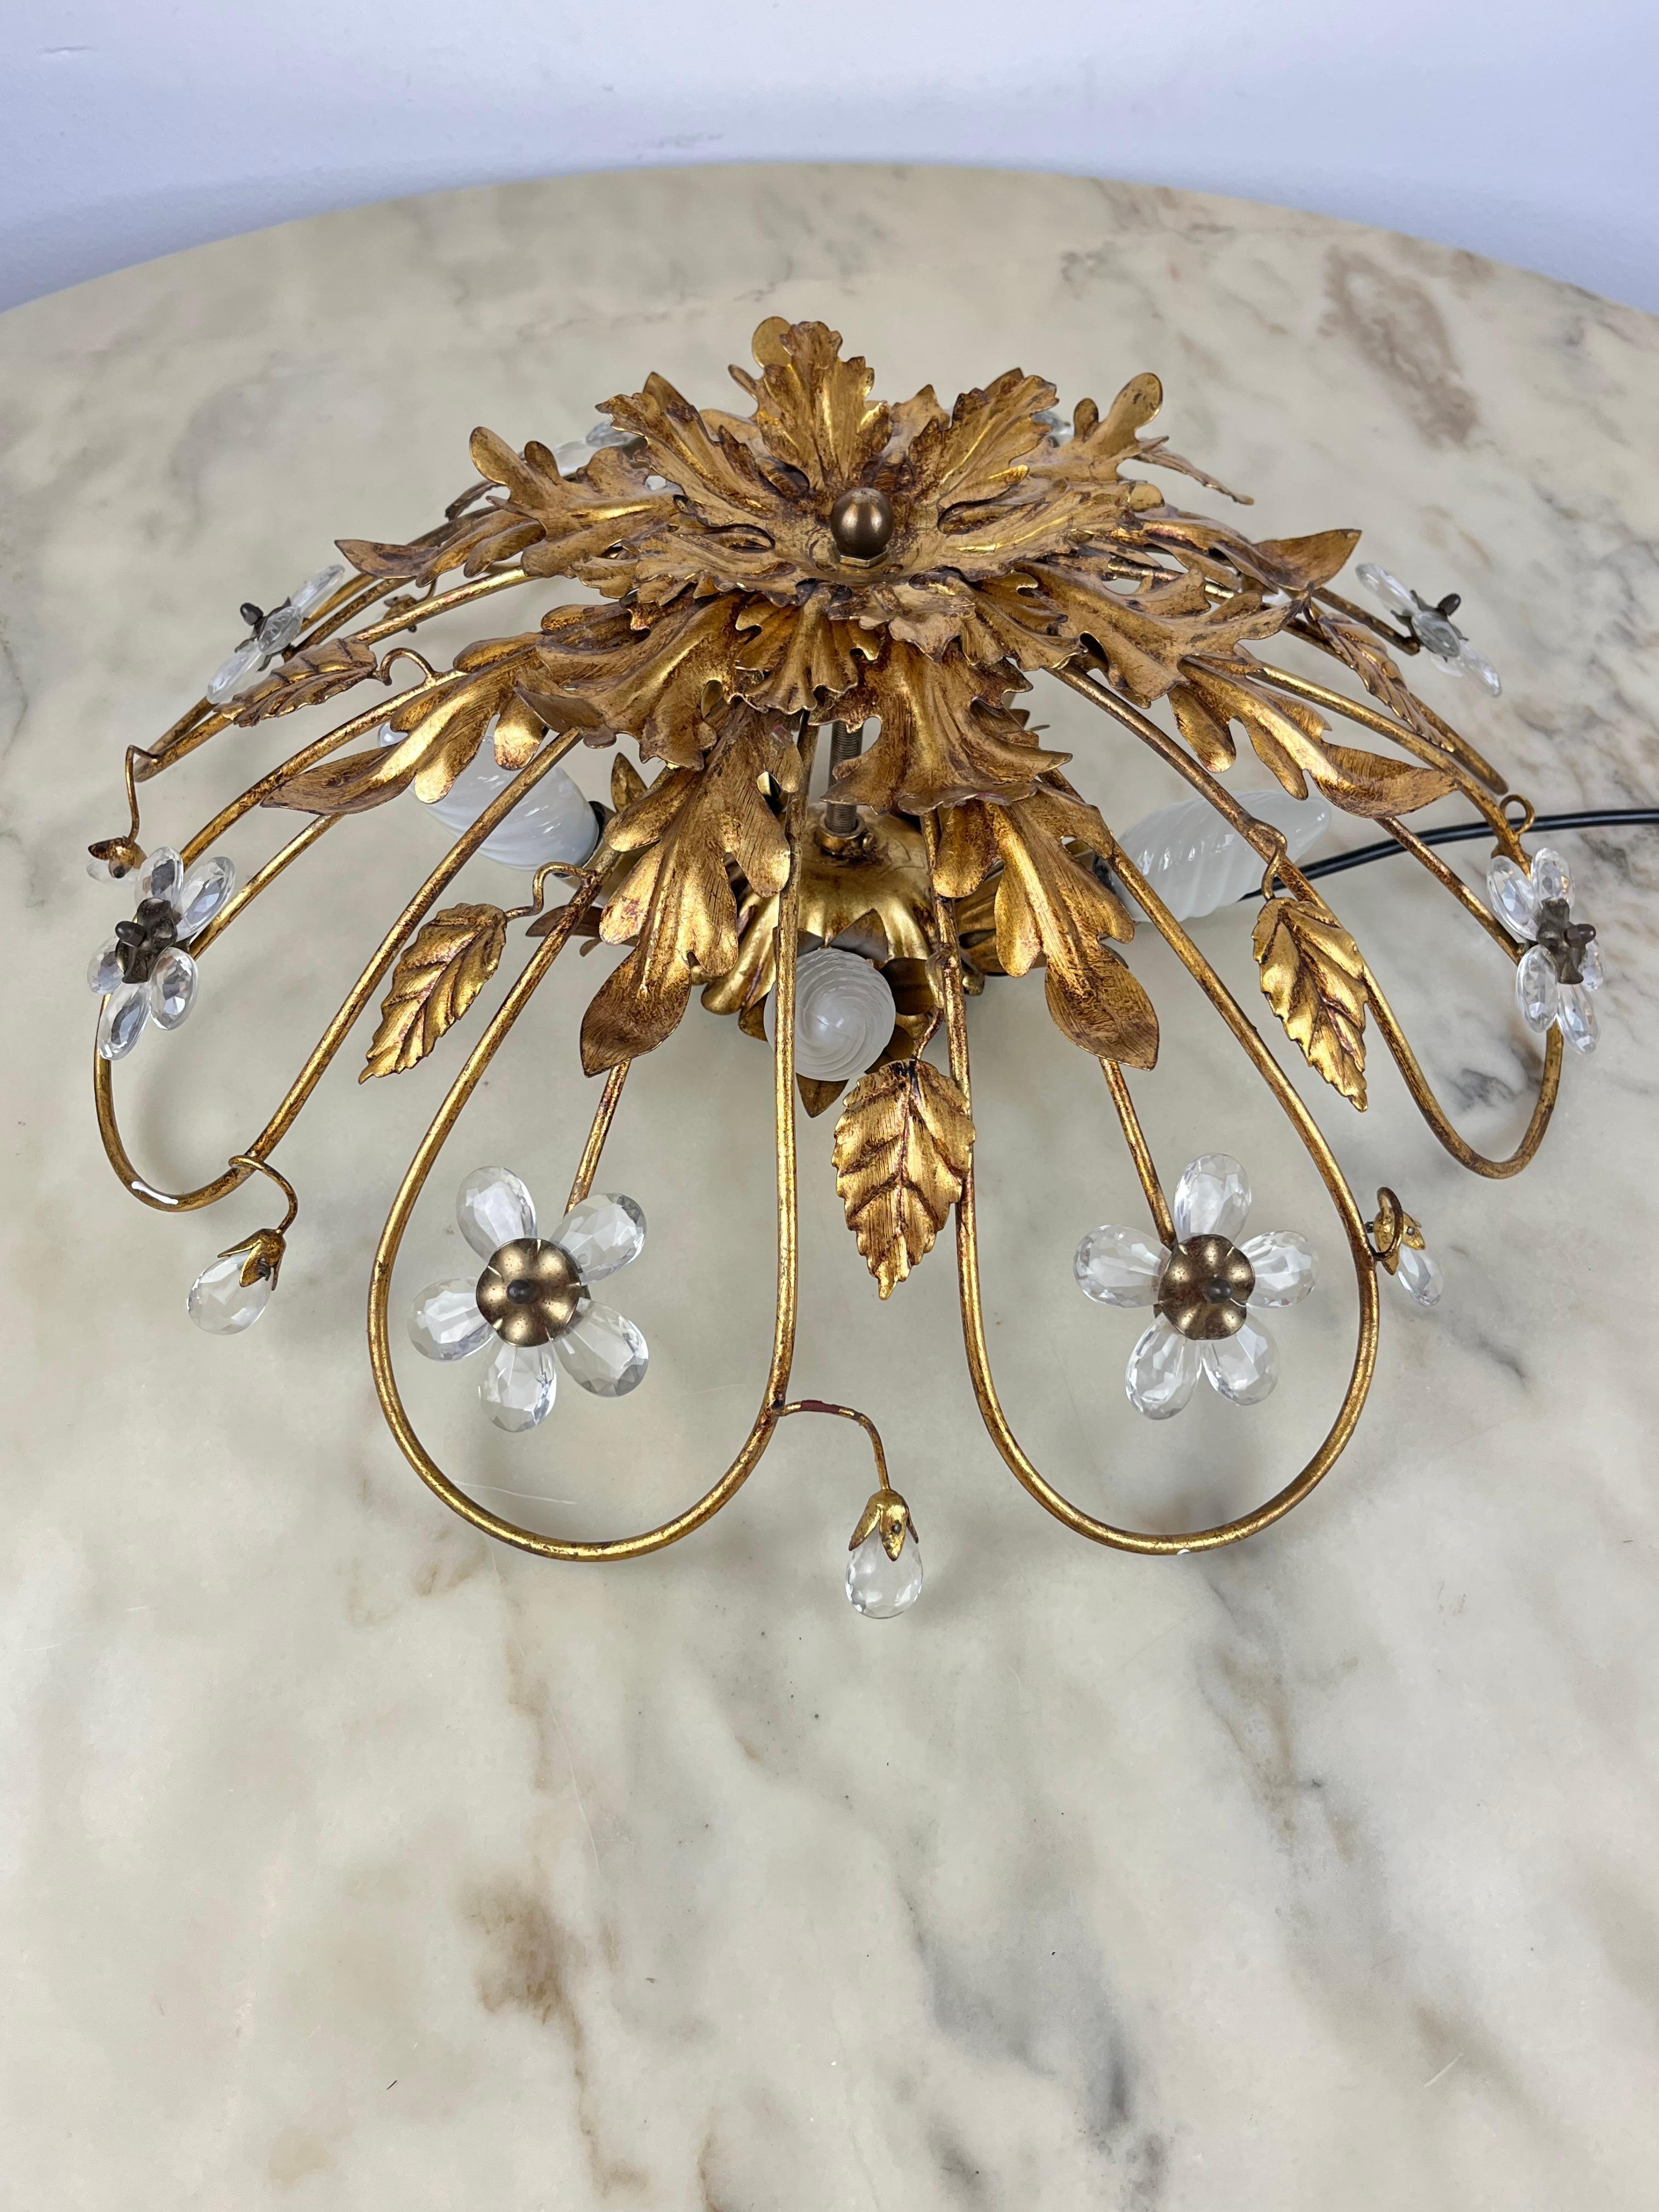 Banci Ceiling Light in Gilded Iron and Crystal Flowers Italian Design 1980s For Sale 3